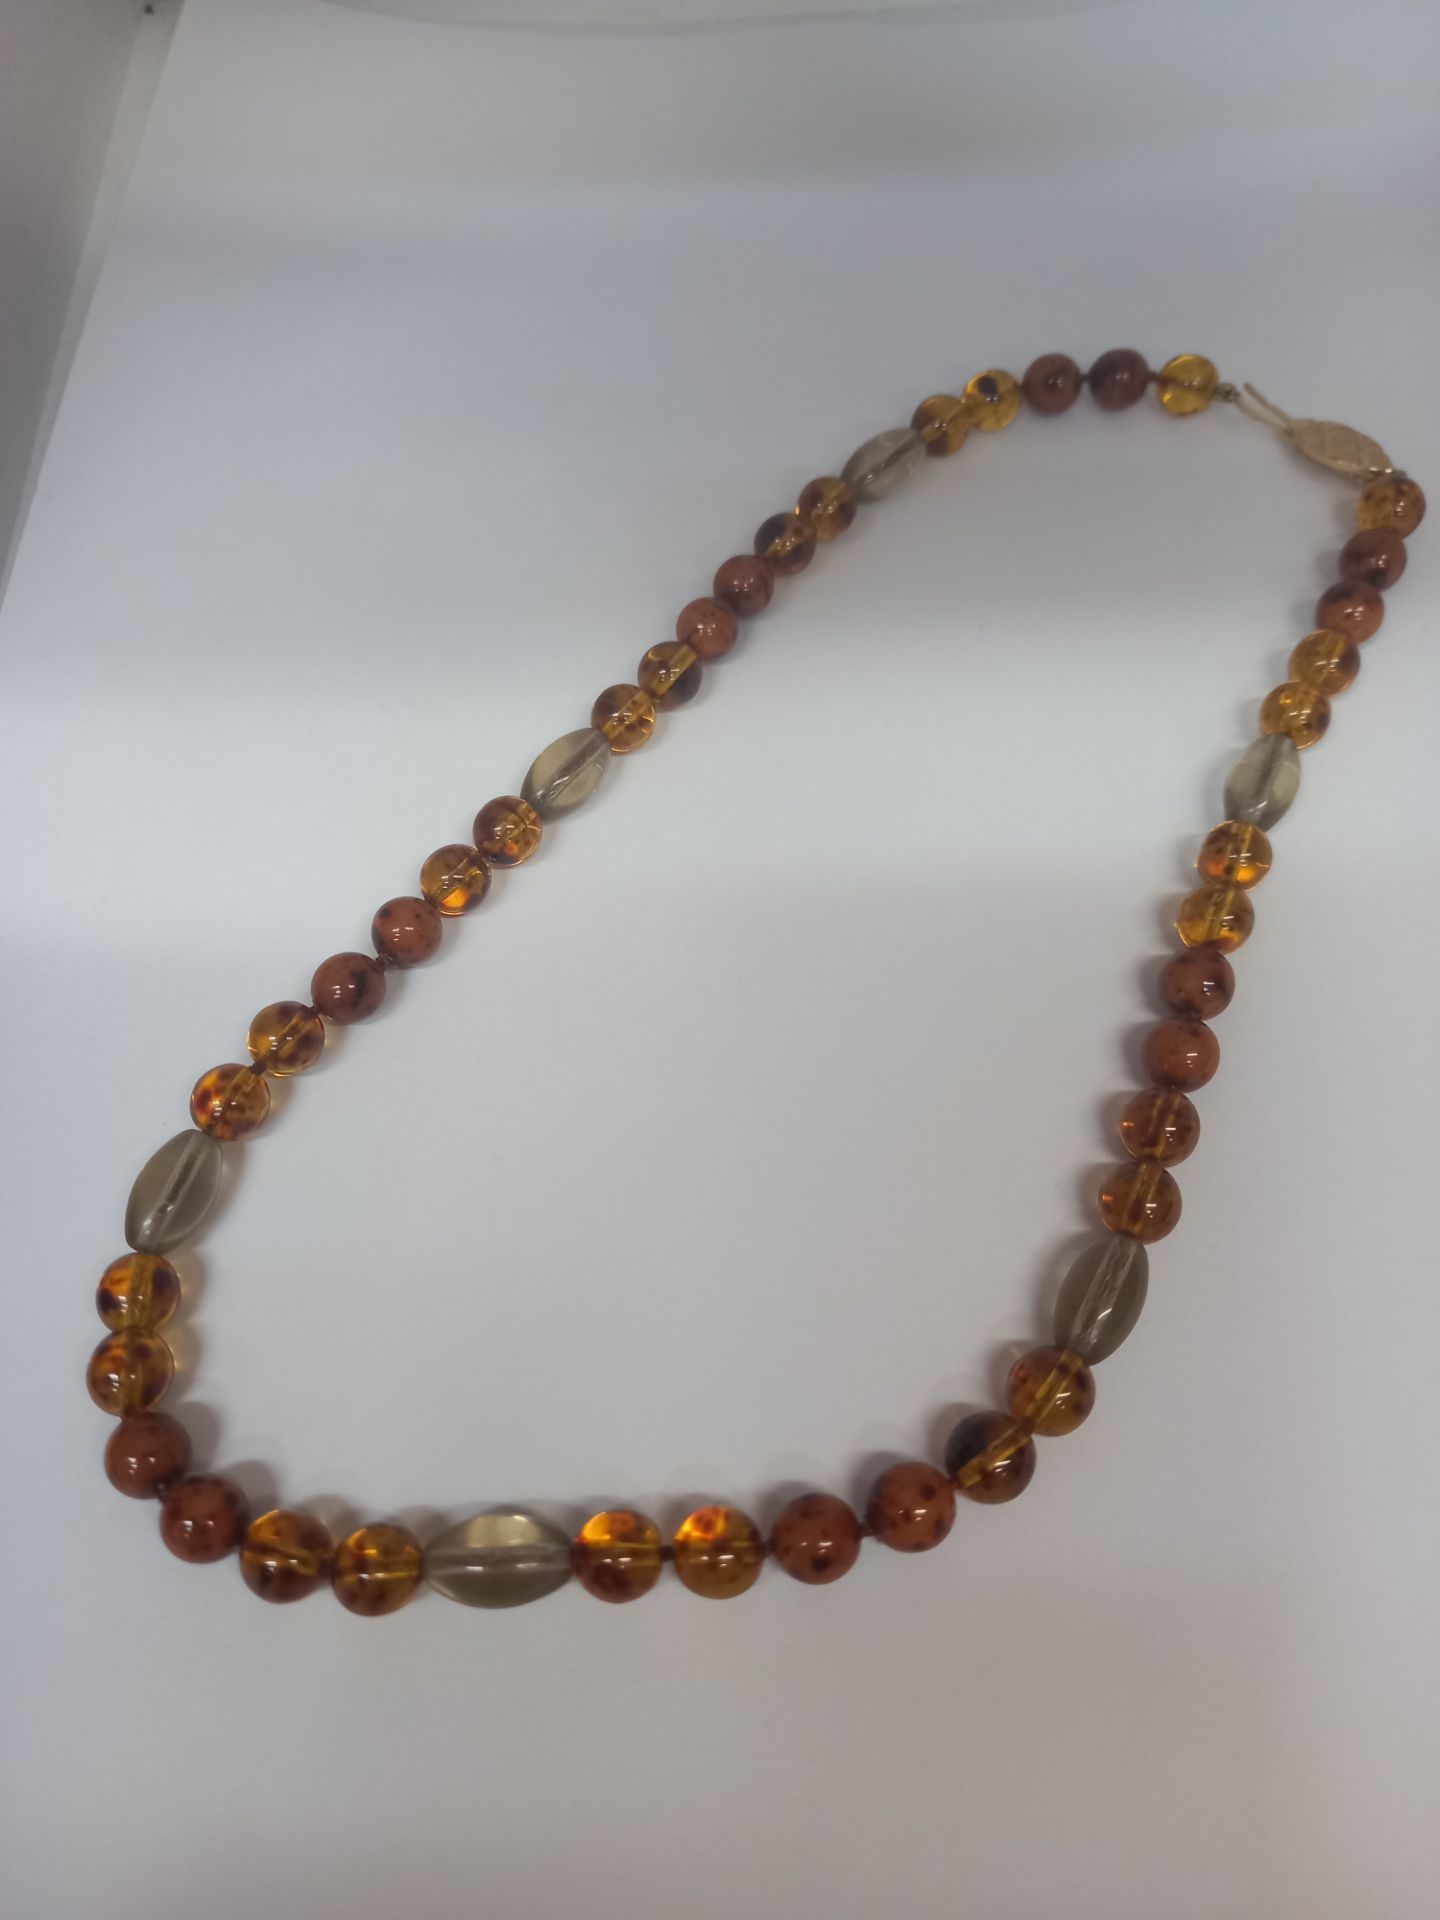 BALTIC KNOTTED AMBER NECKLACE - Image 3 of 6